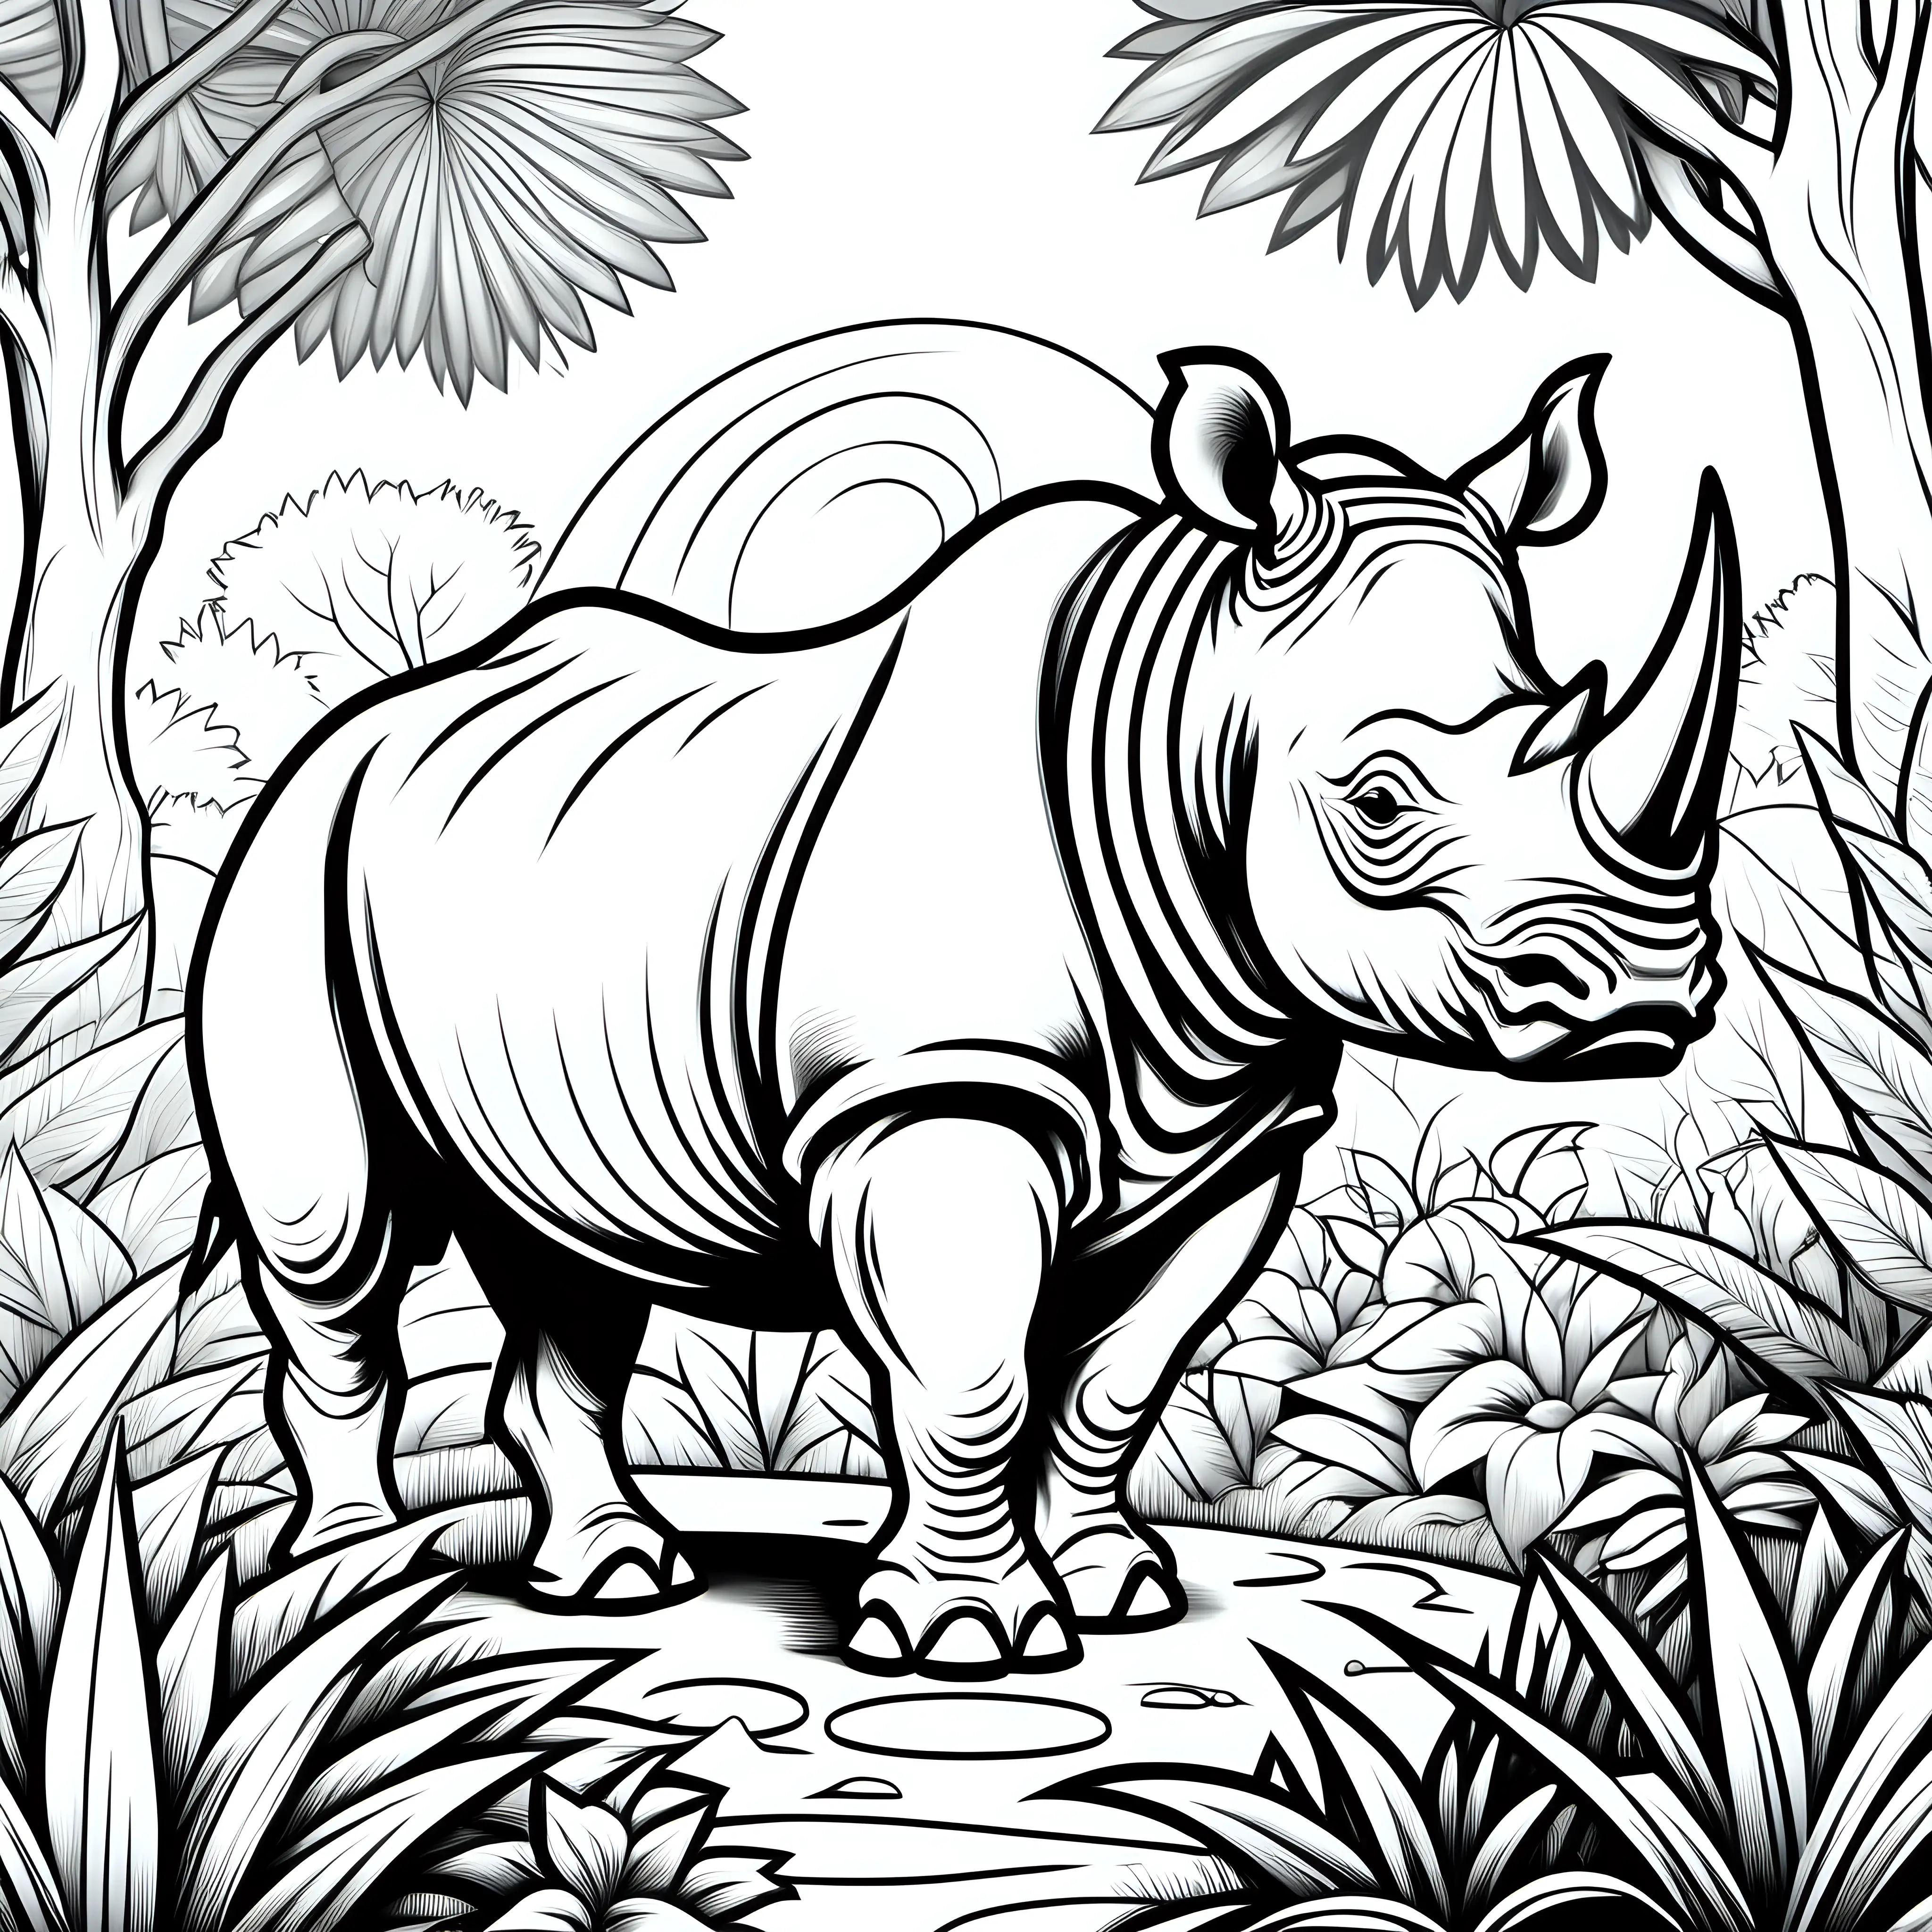 Whimsical Rhinoceros Coloring Page for Kids Garden of Eden Theme